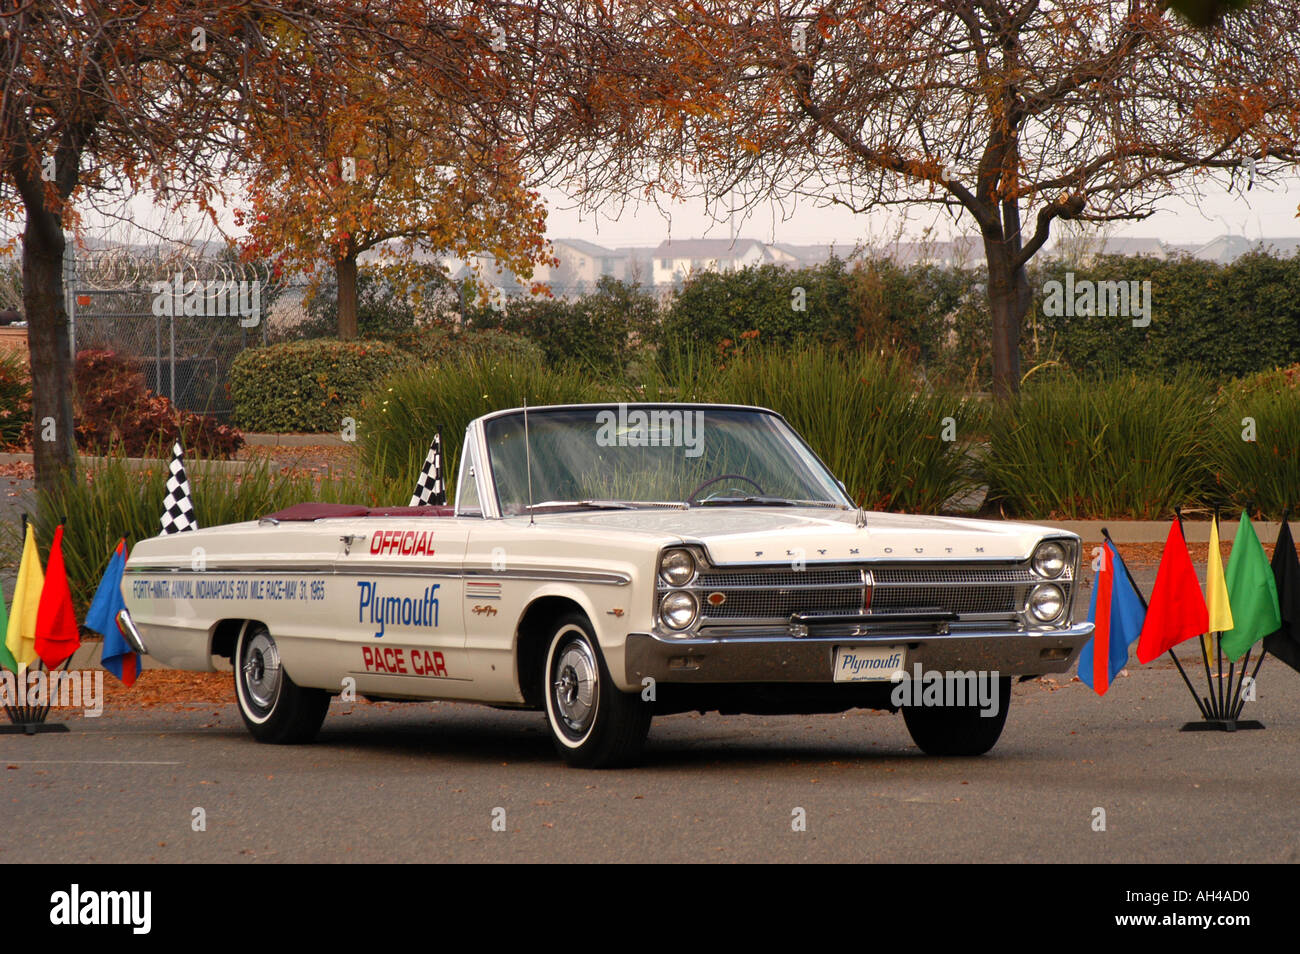 1965 plymouth super fury indianapolis pace car Stock Photo